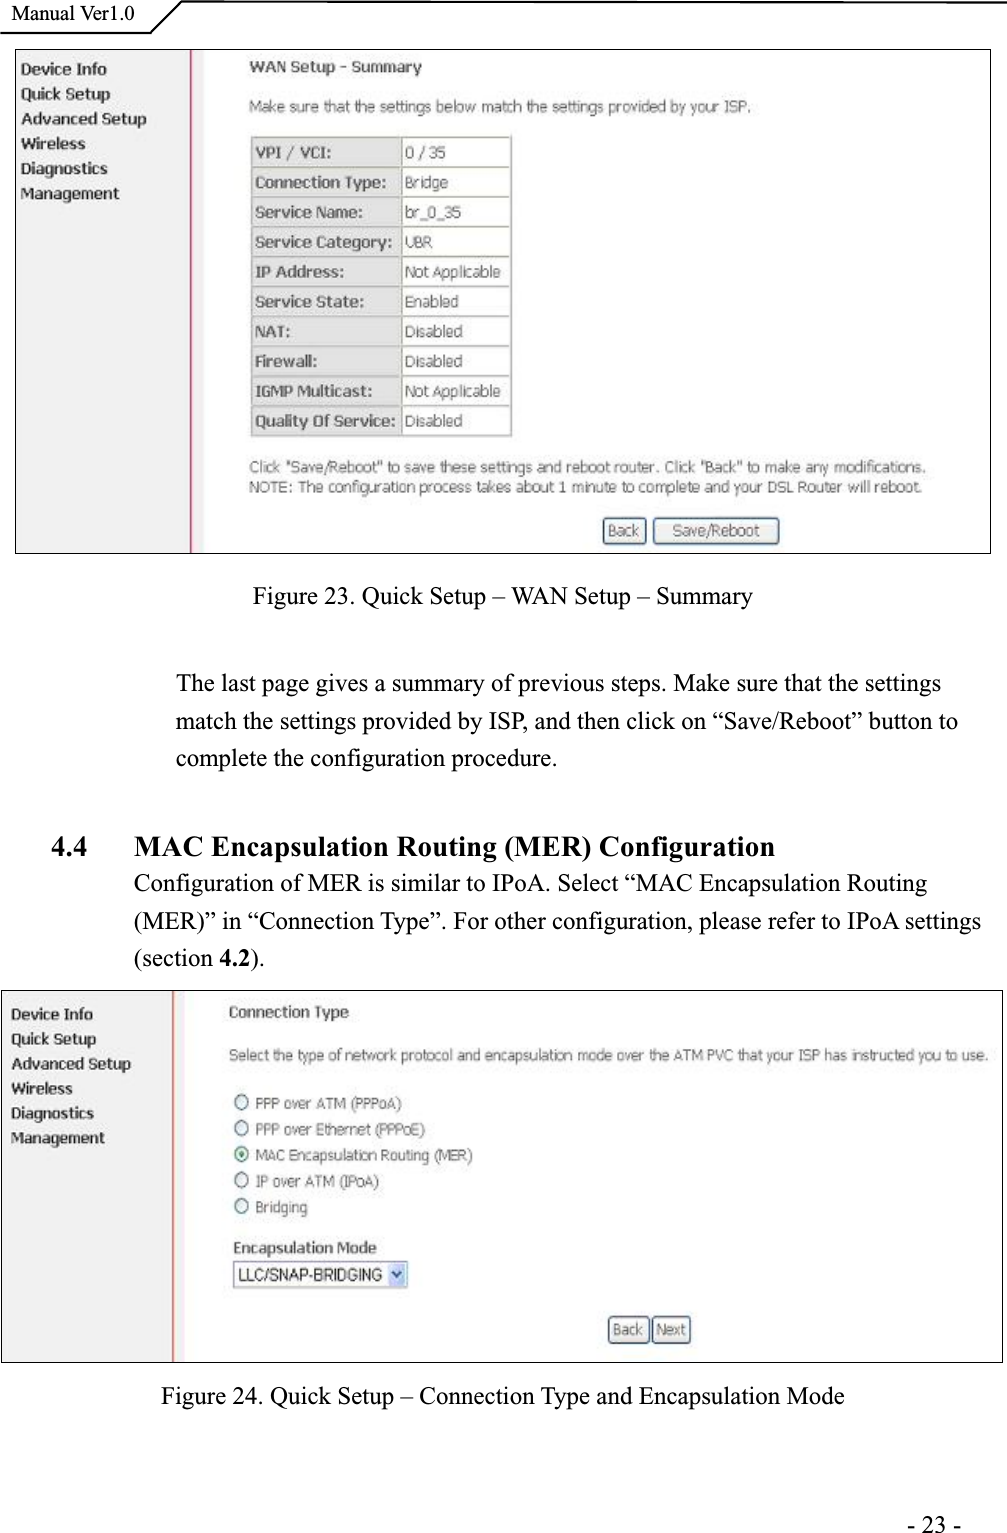  Manual Ver1.0Figure 23. Quick Setup – WAN Setup – SummaryThe last page gives a summary of previous steps. Make sure that the settings match the settings provided by ISP, and then click on “Save/Reboot” button to complete the configuration procedure. 4.4 MAC Encapsulation Routing (MER) Configuration Configuration of MER is similar to IPoA. Select “MAC Encapsulation Routing (MER)” in “Connection Type”. For other configuration, please refer to IPoA settings (section 4.2).Figure 24. Quick Setup – Connection Type and Encapsulation Mode                                                                      -23-